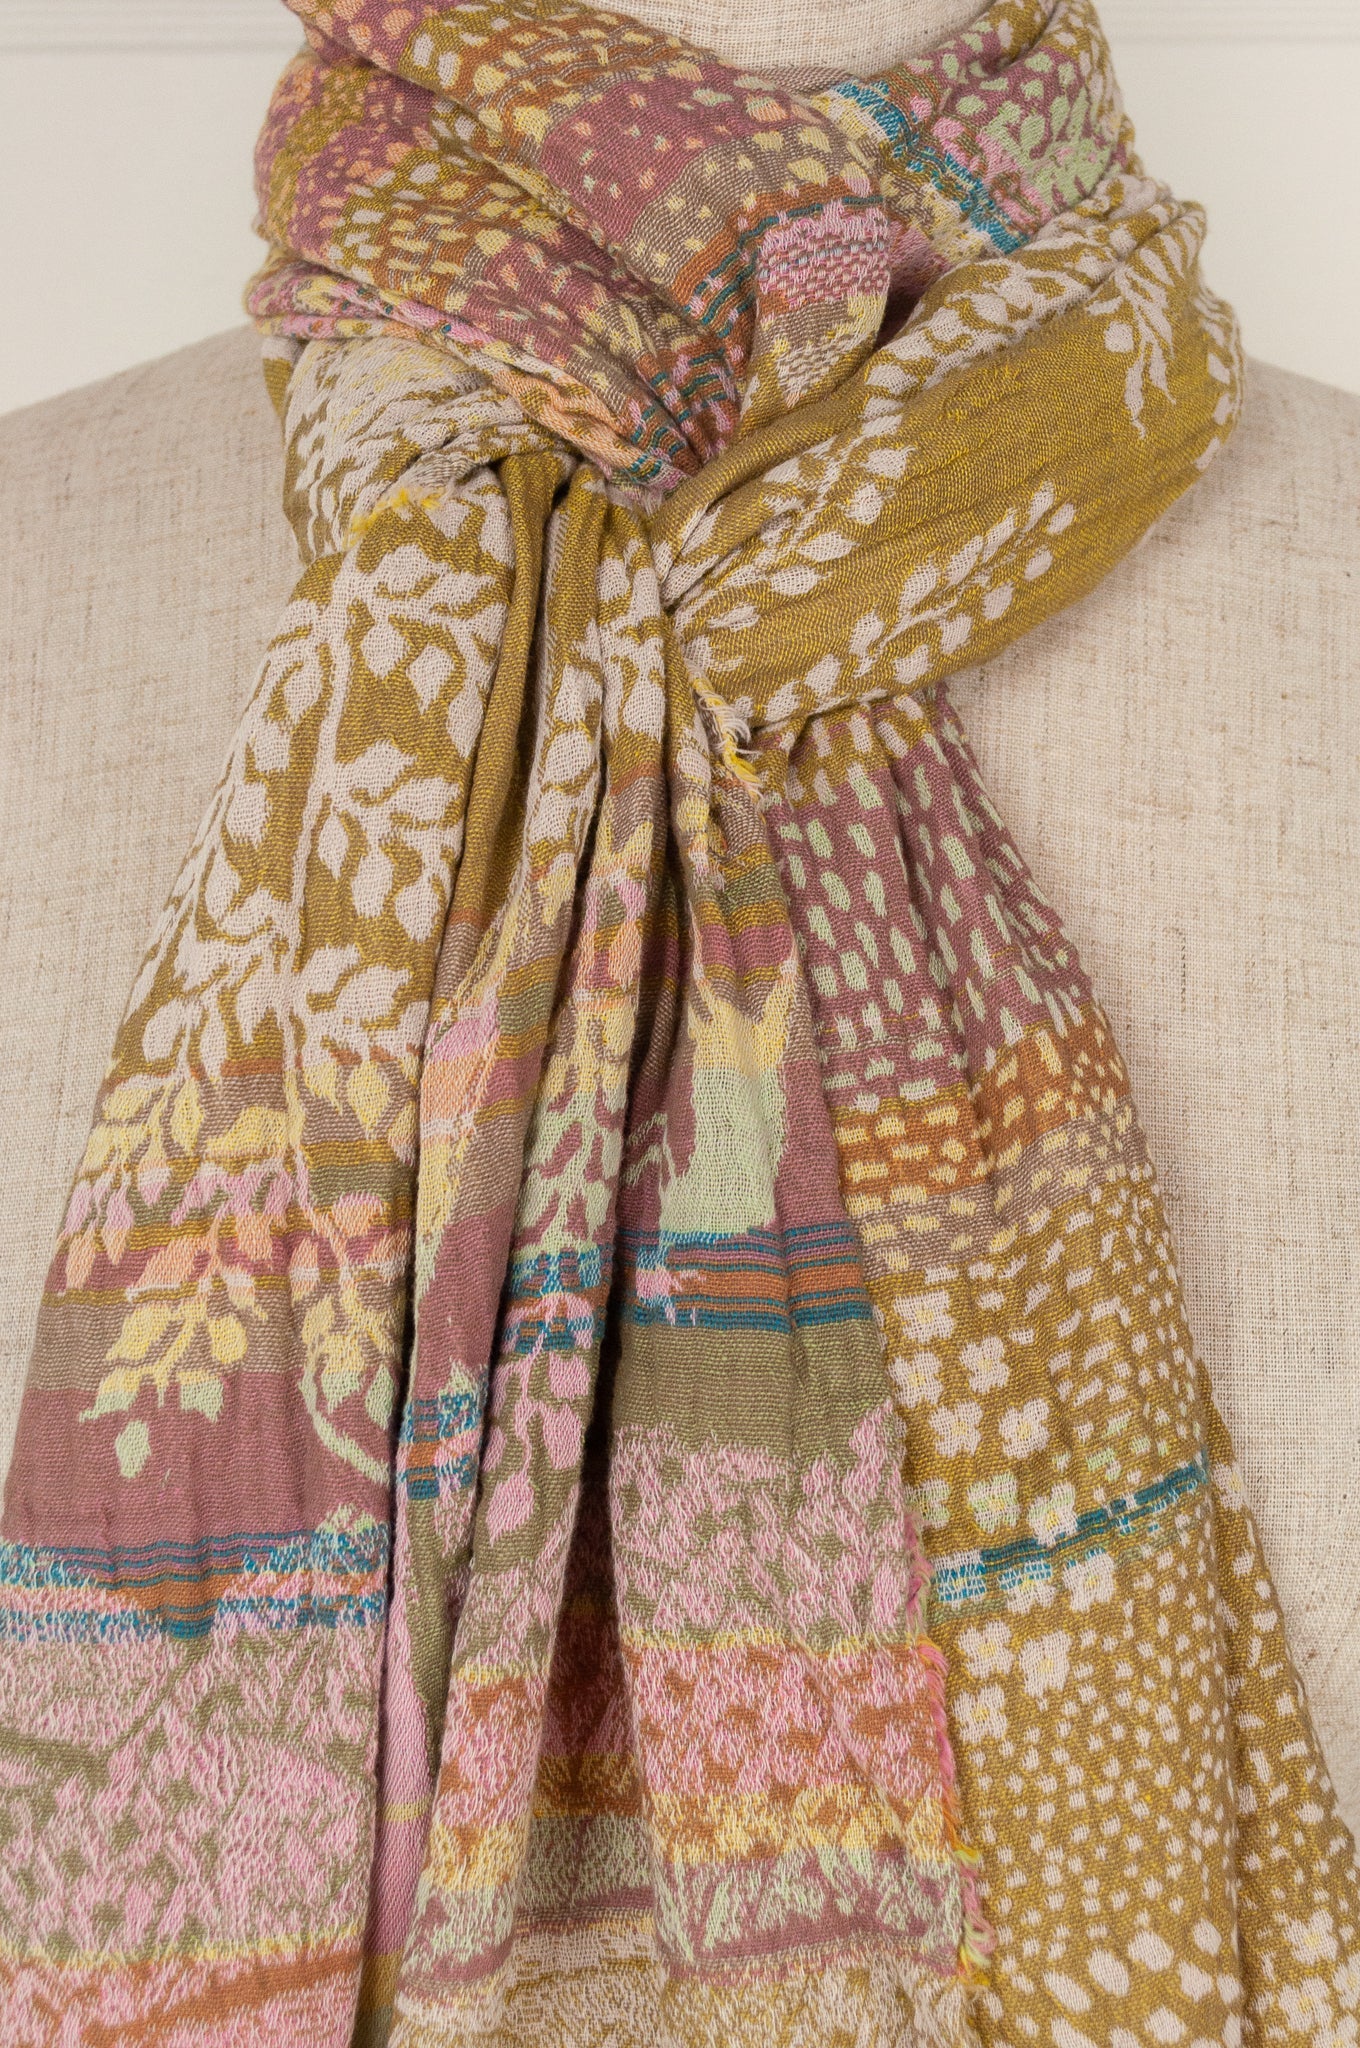 French Jacquard Scarf  - Flavie Pollens